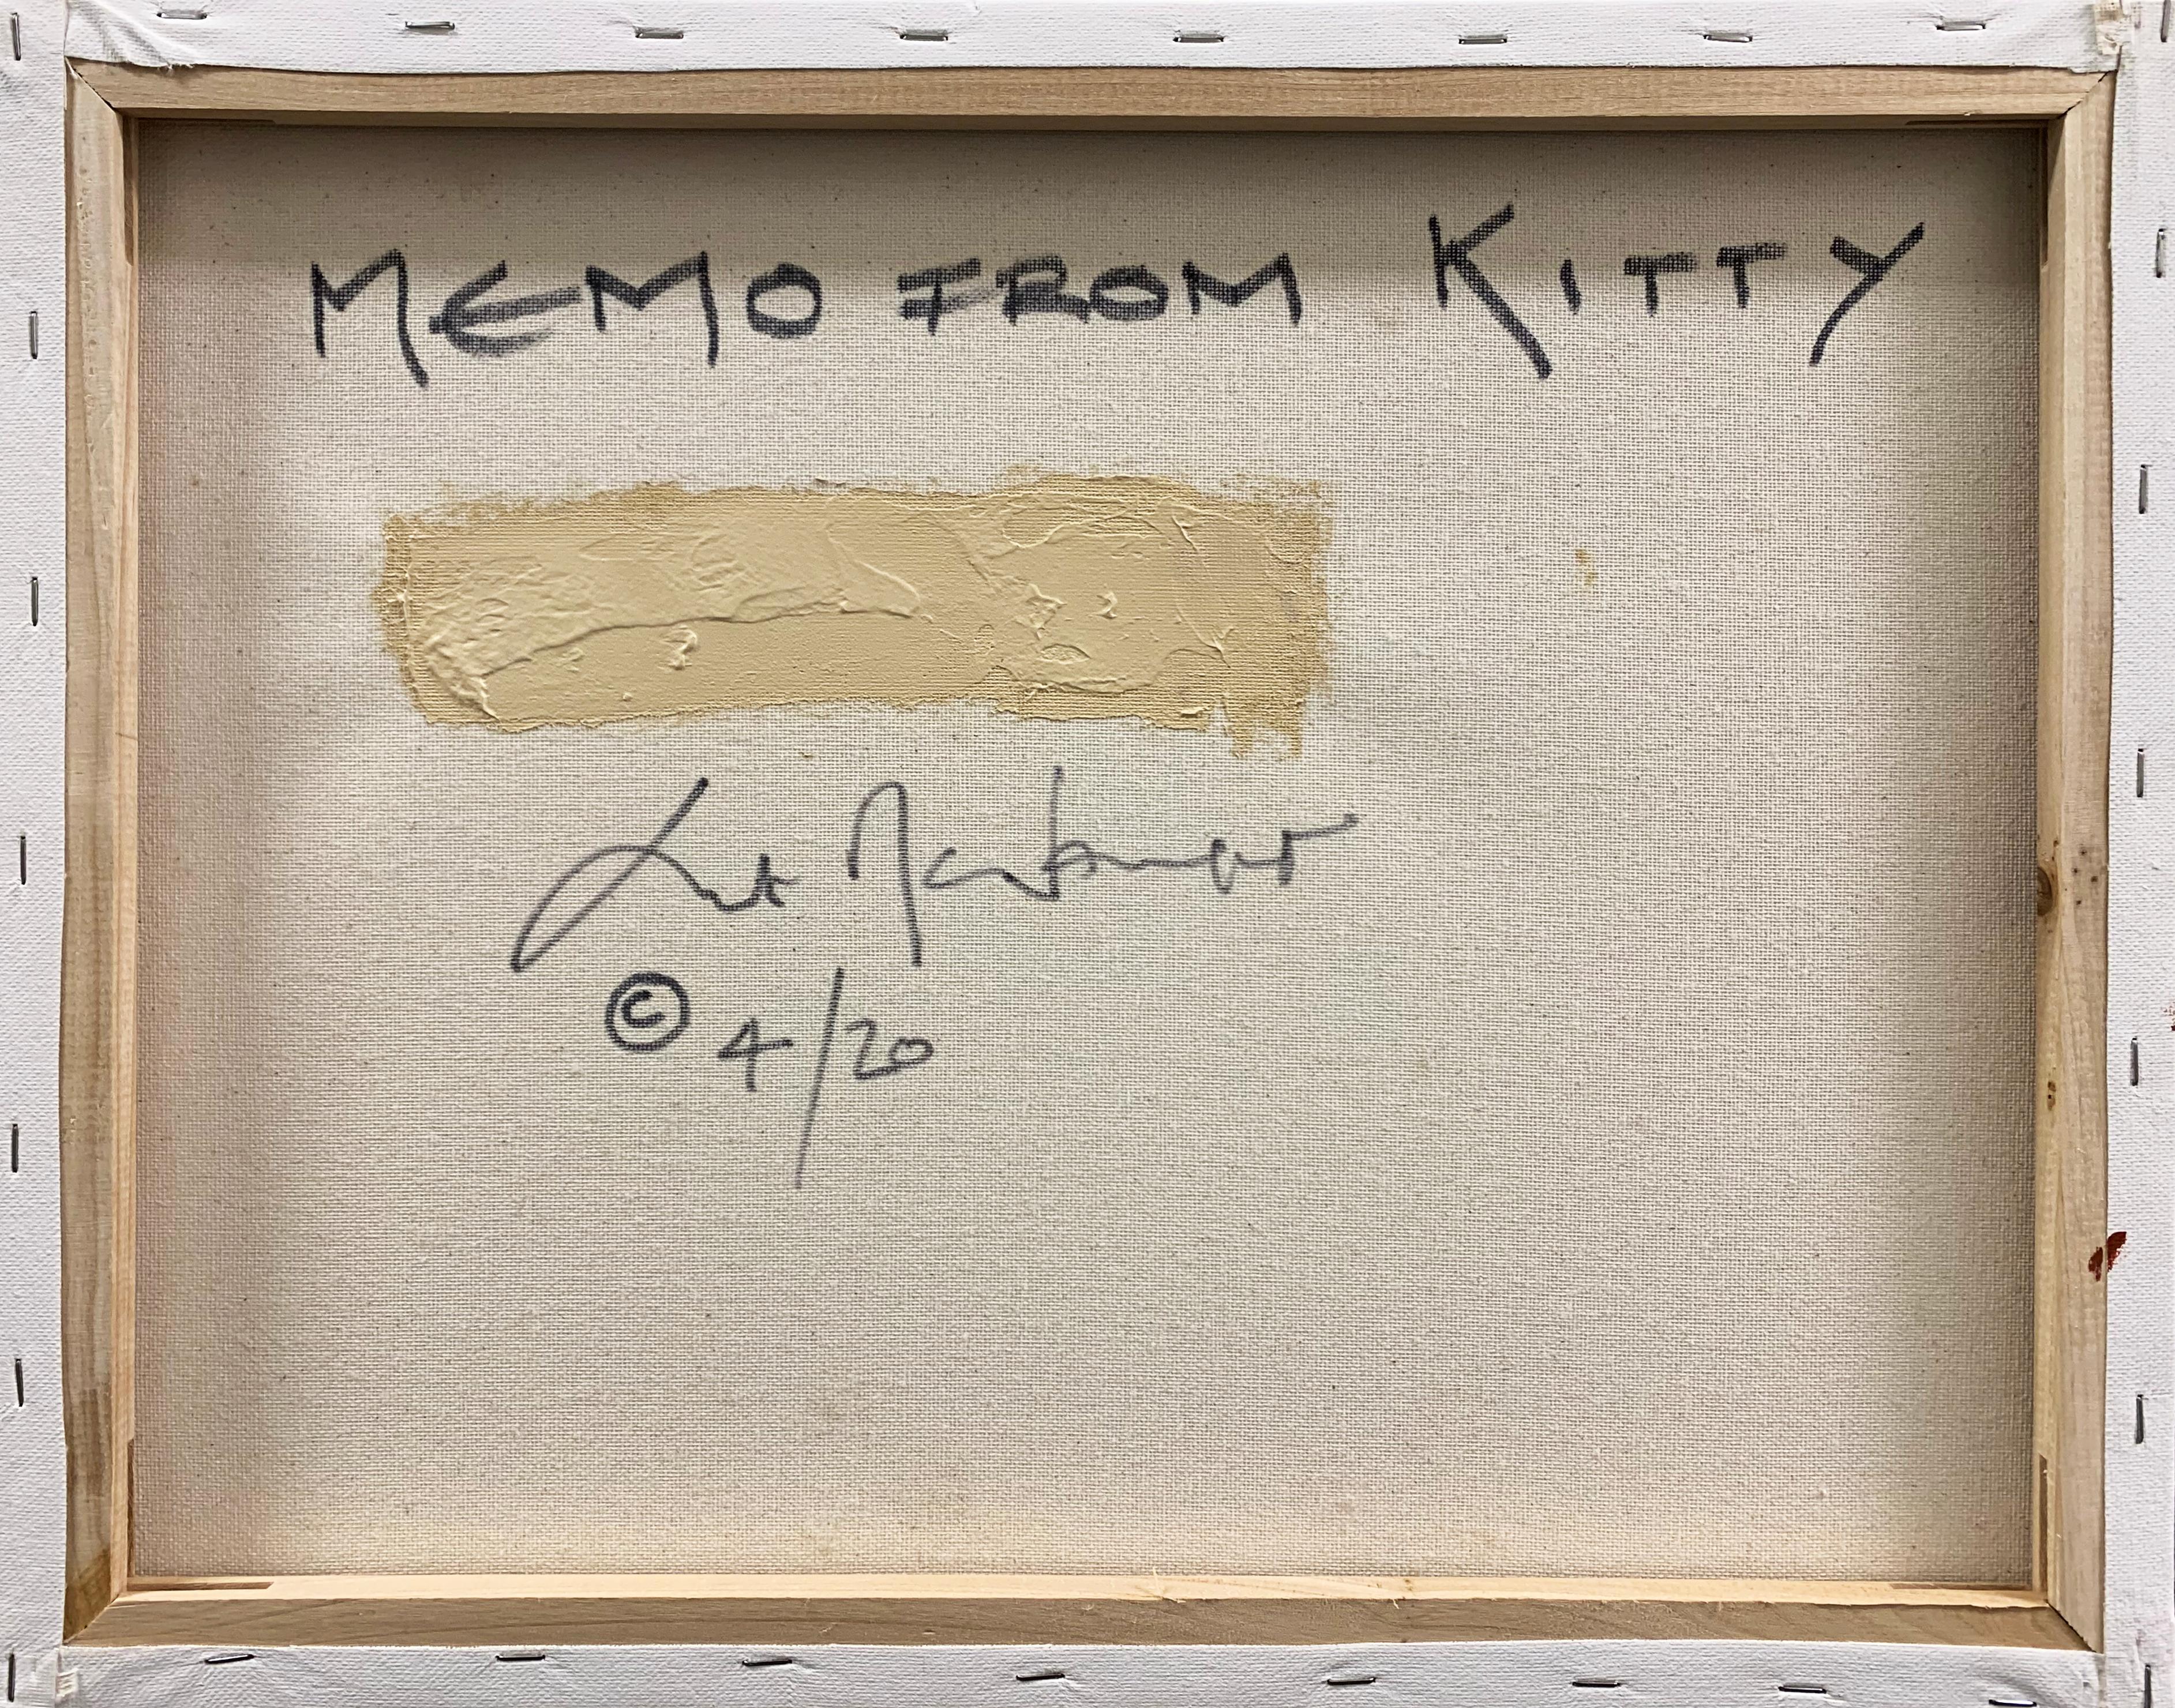 Painted by Anthony McNaught (American, born 1952); Signed verso, 'Ant McNaught', titled 'Memo from Kitty', and dated, '4/20'.

This California Post-Impressionist and Abstract Expressionist artist has studied at the Esalen Institute with Erin Gafill